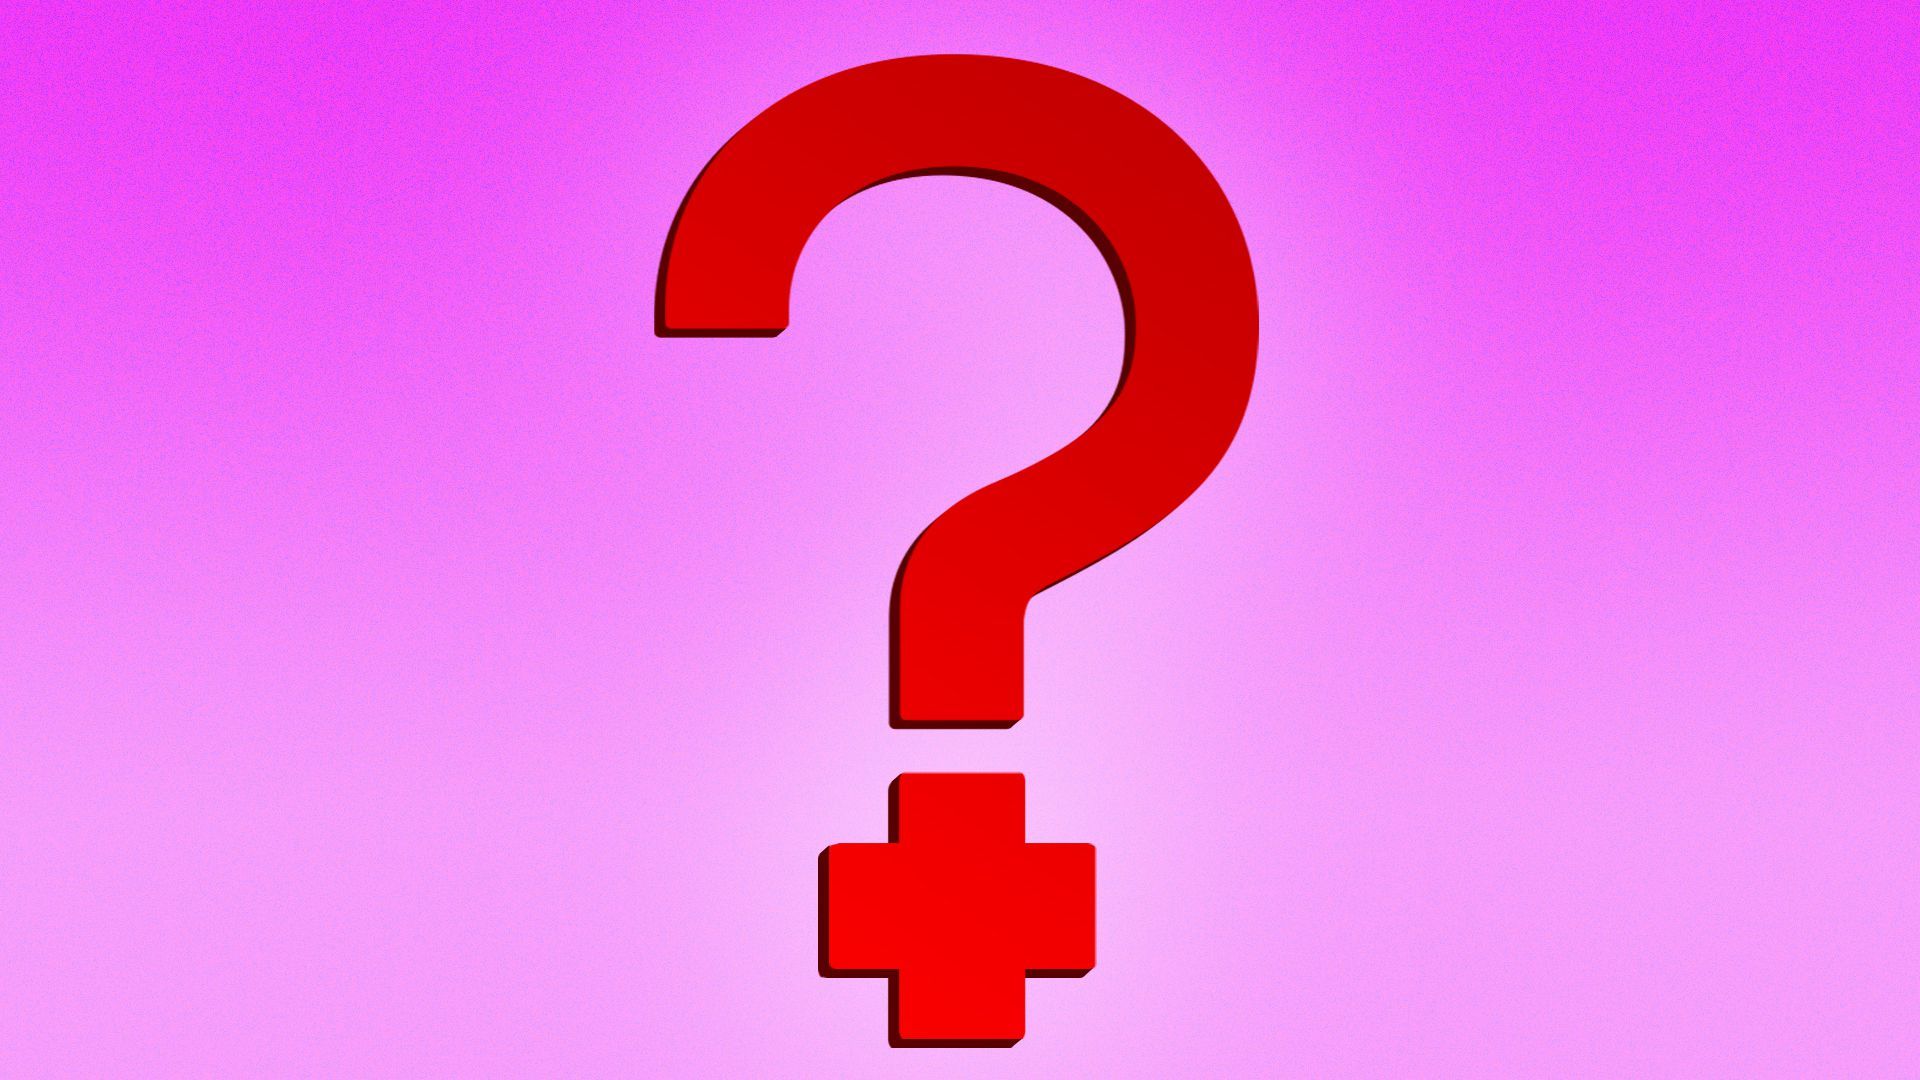 Illustration of a question mark with a dot shaped like a medical cross